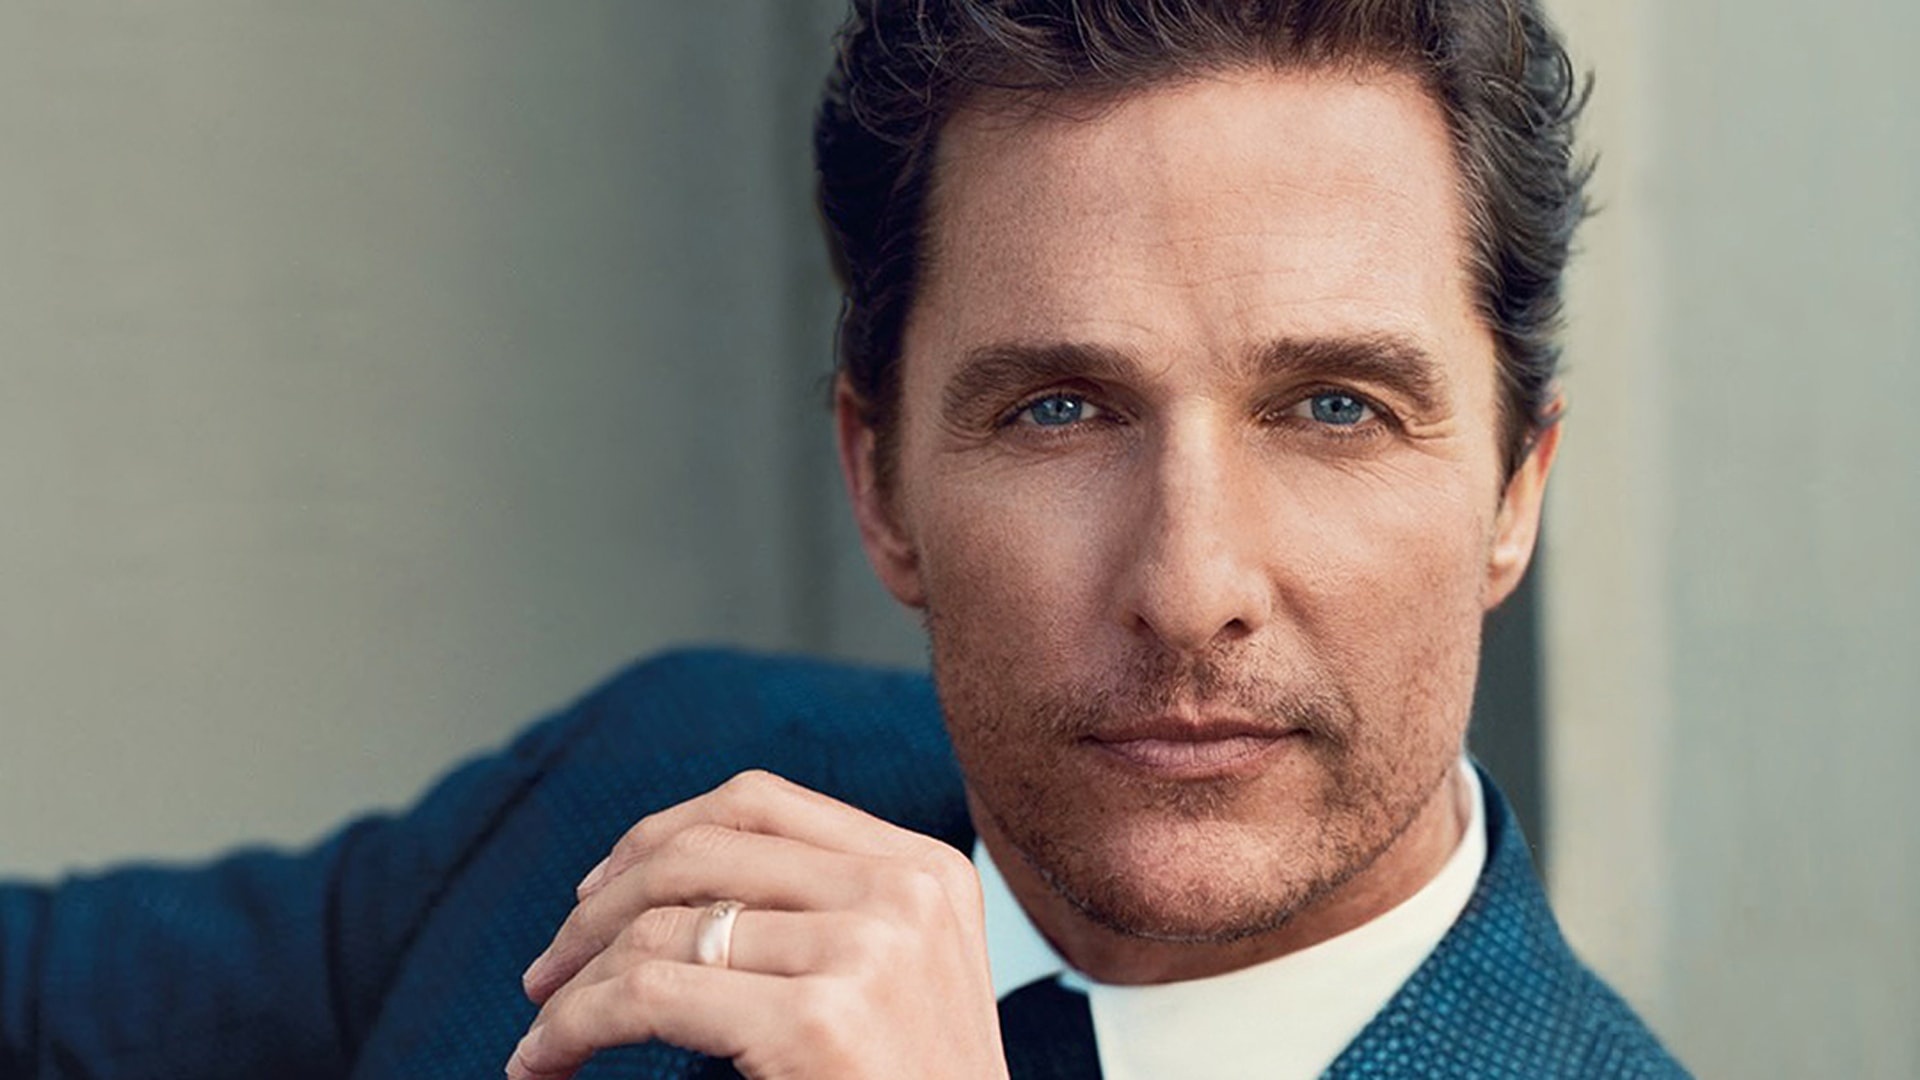 Matthew McConaughey: The Independent Spirit Award for Best Supporting Male. 1920x1080 Full HD Wallpaper.